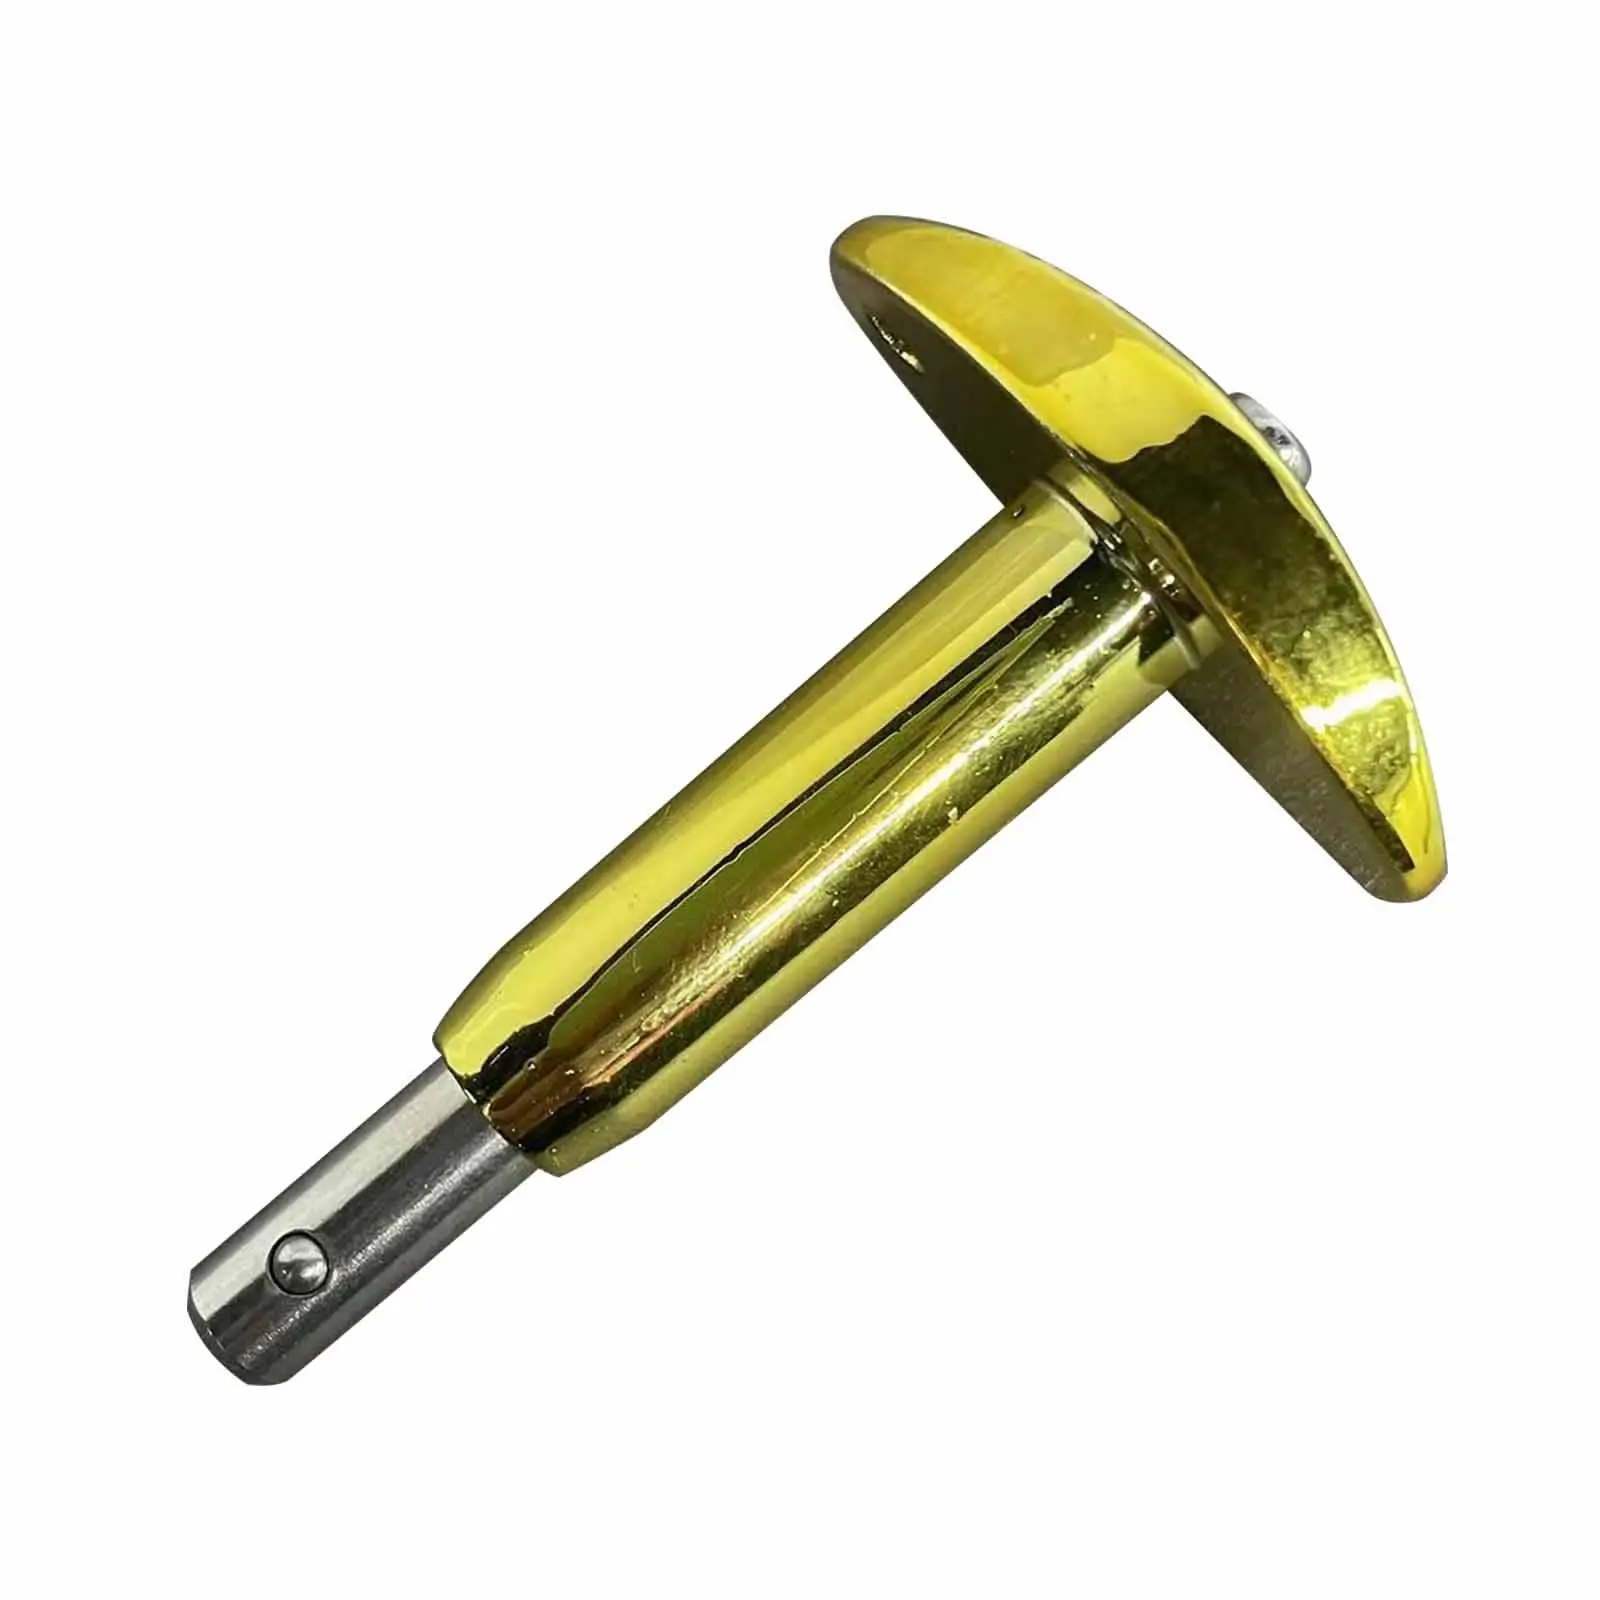 Skateboard Bearings Remover Tool Disassemble Skating 608 Bearings Tool Bearing Remover Skate Wheels Bearing Extractor Accessory